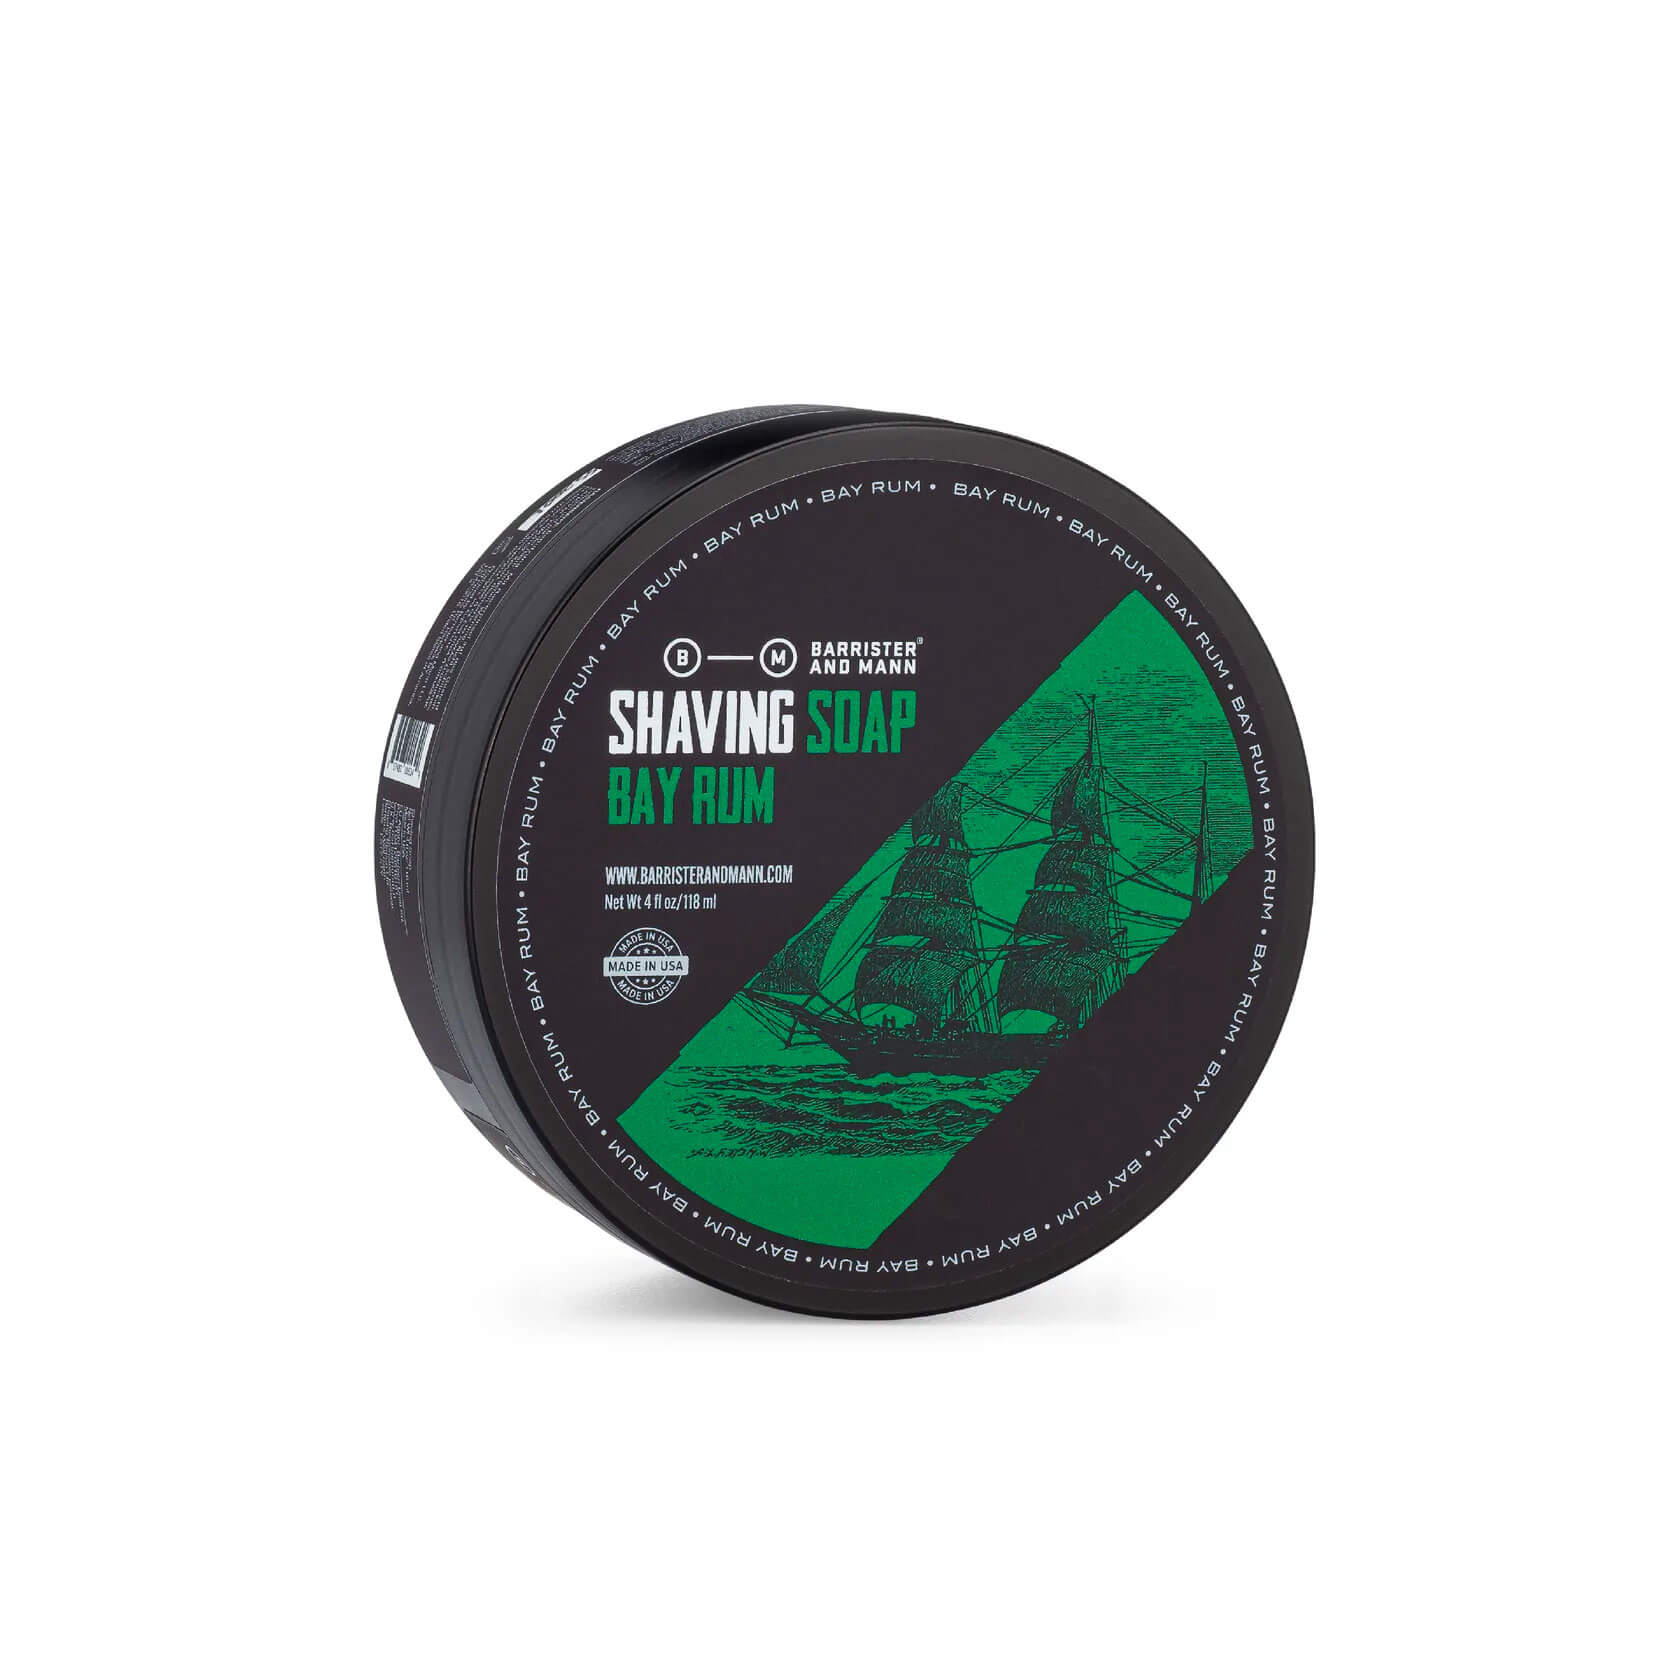 Barrister and Mann Bay Rum Shaving Soap